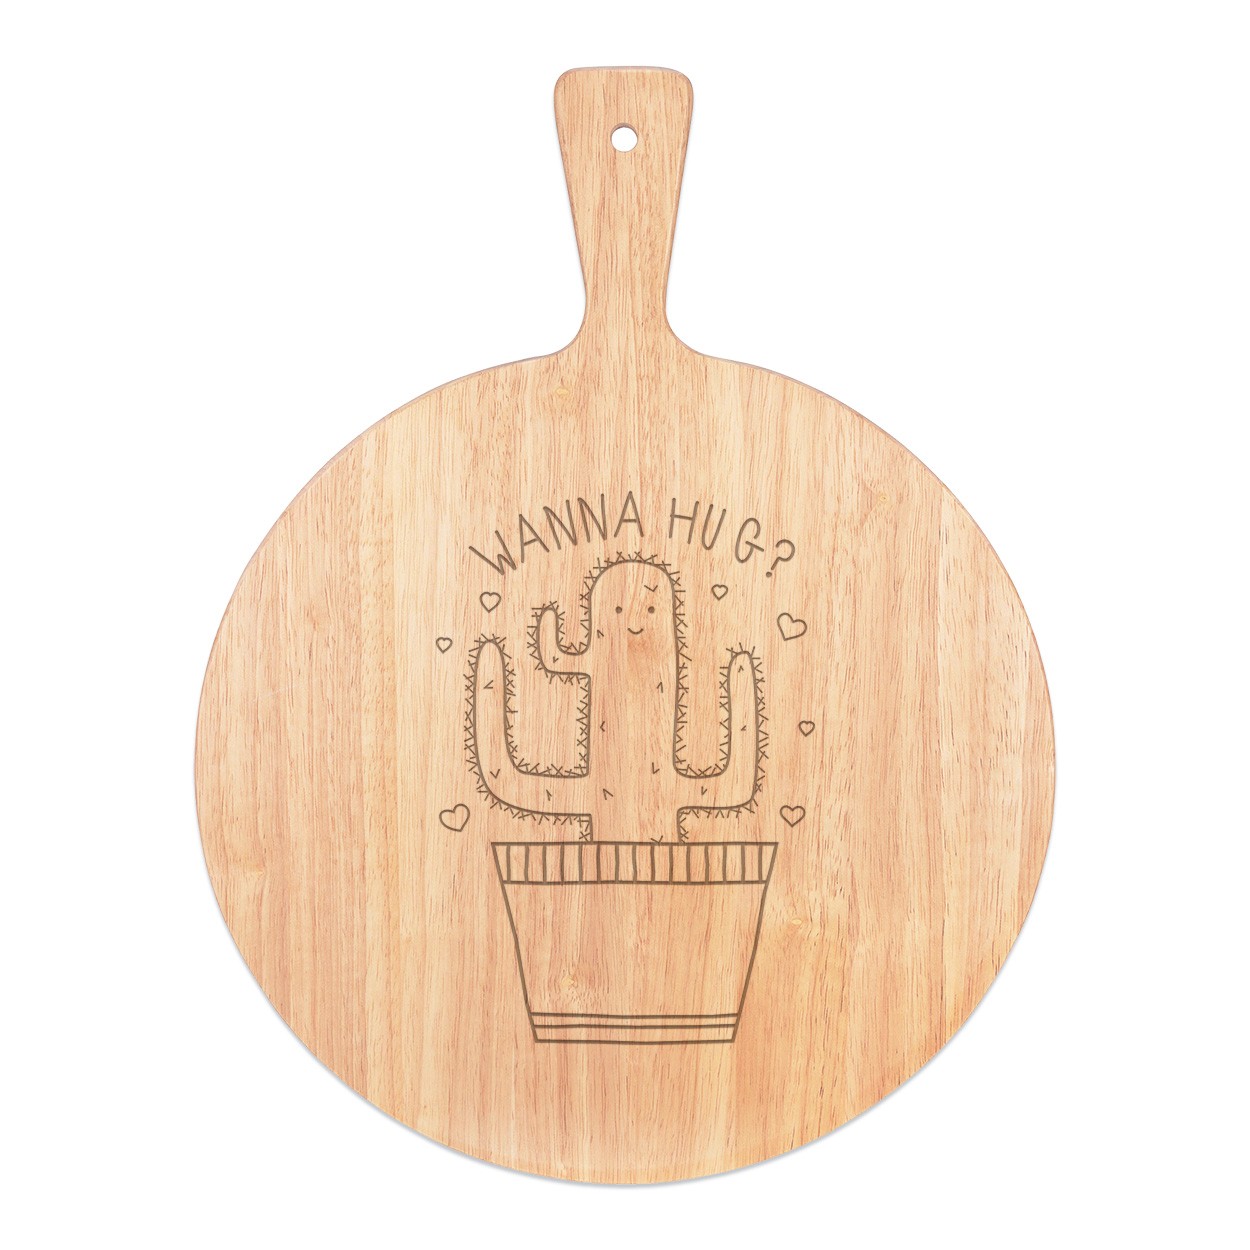 Cactus Wanna Hug Pizza Board Paddle Serving Tray Handle Round Wooden 45x34cm